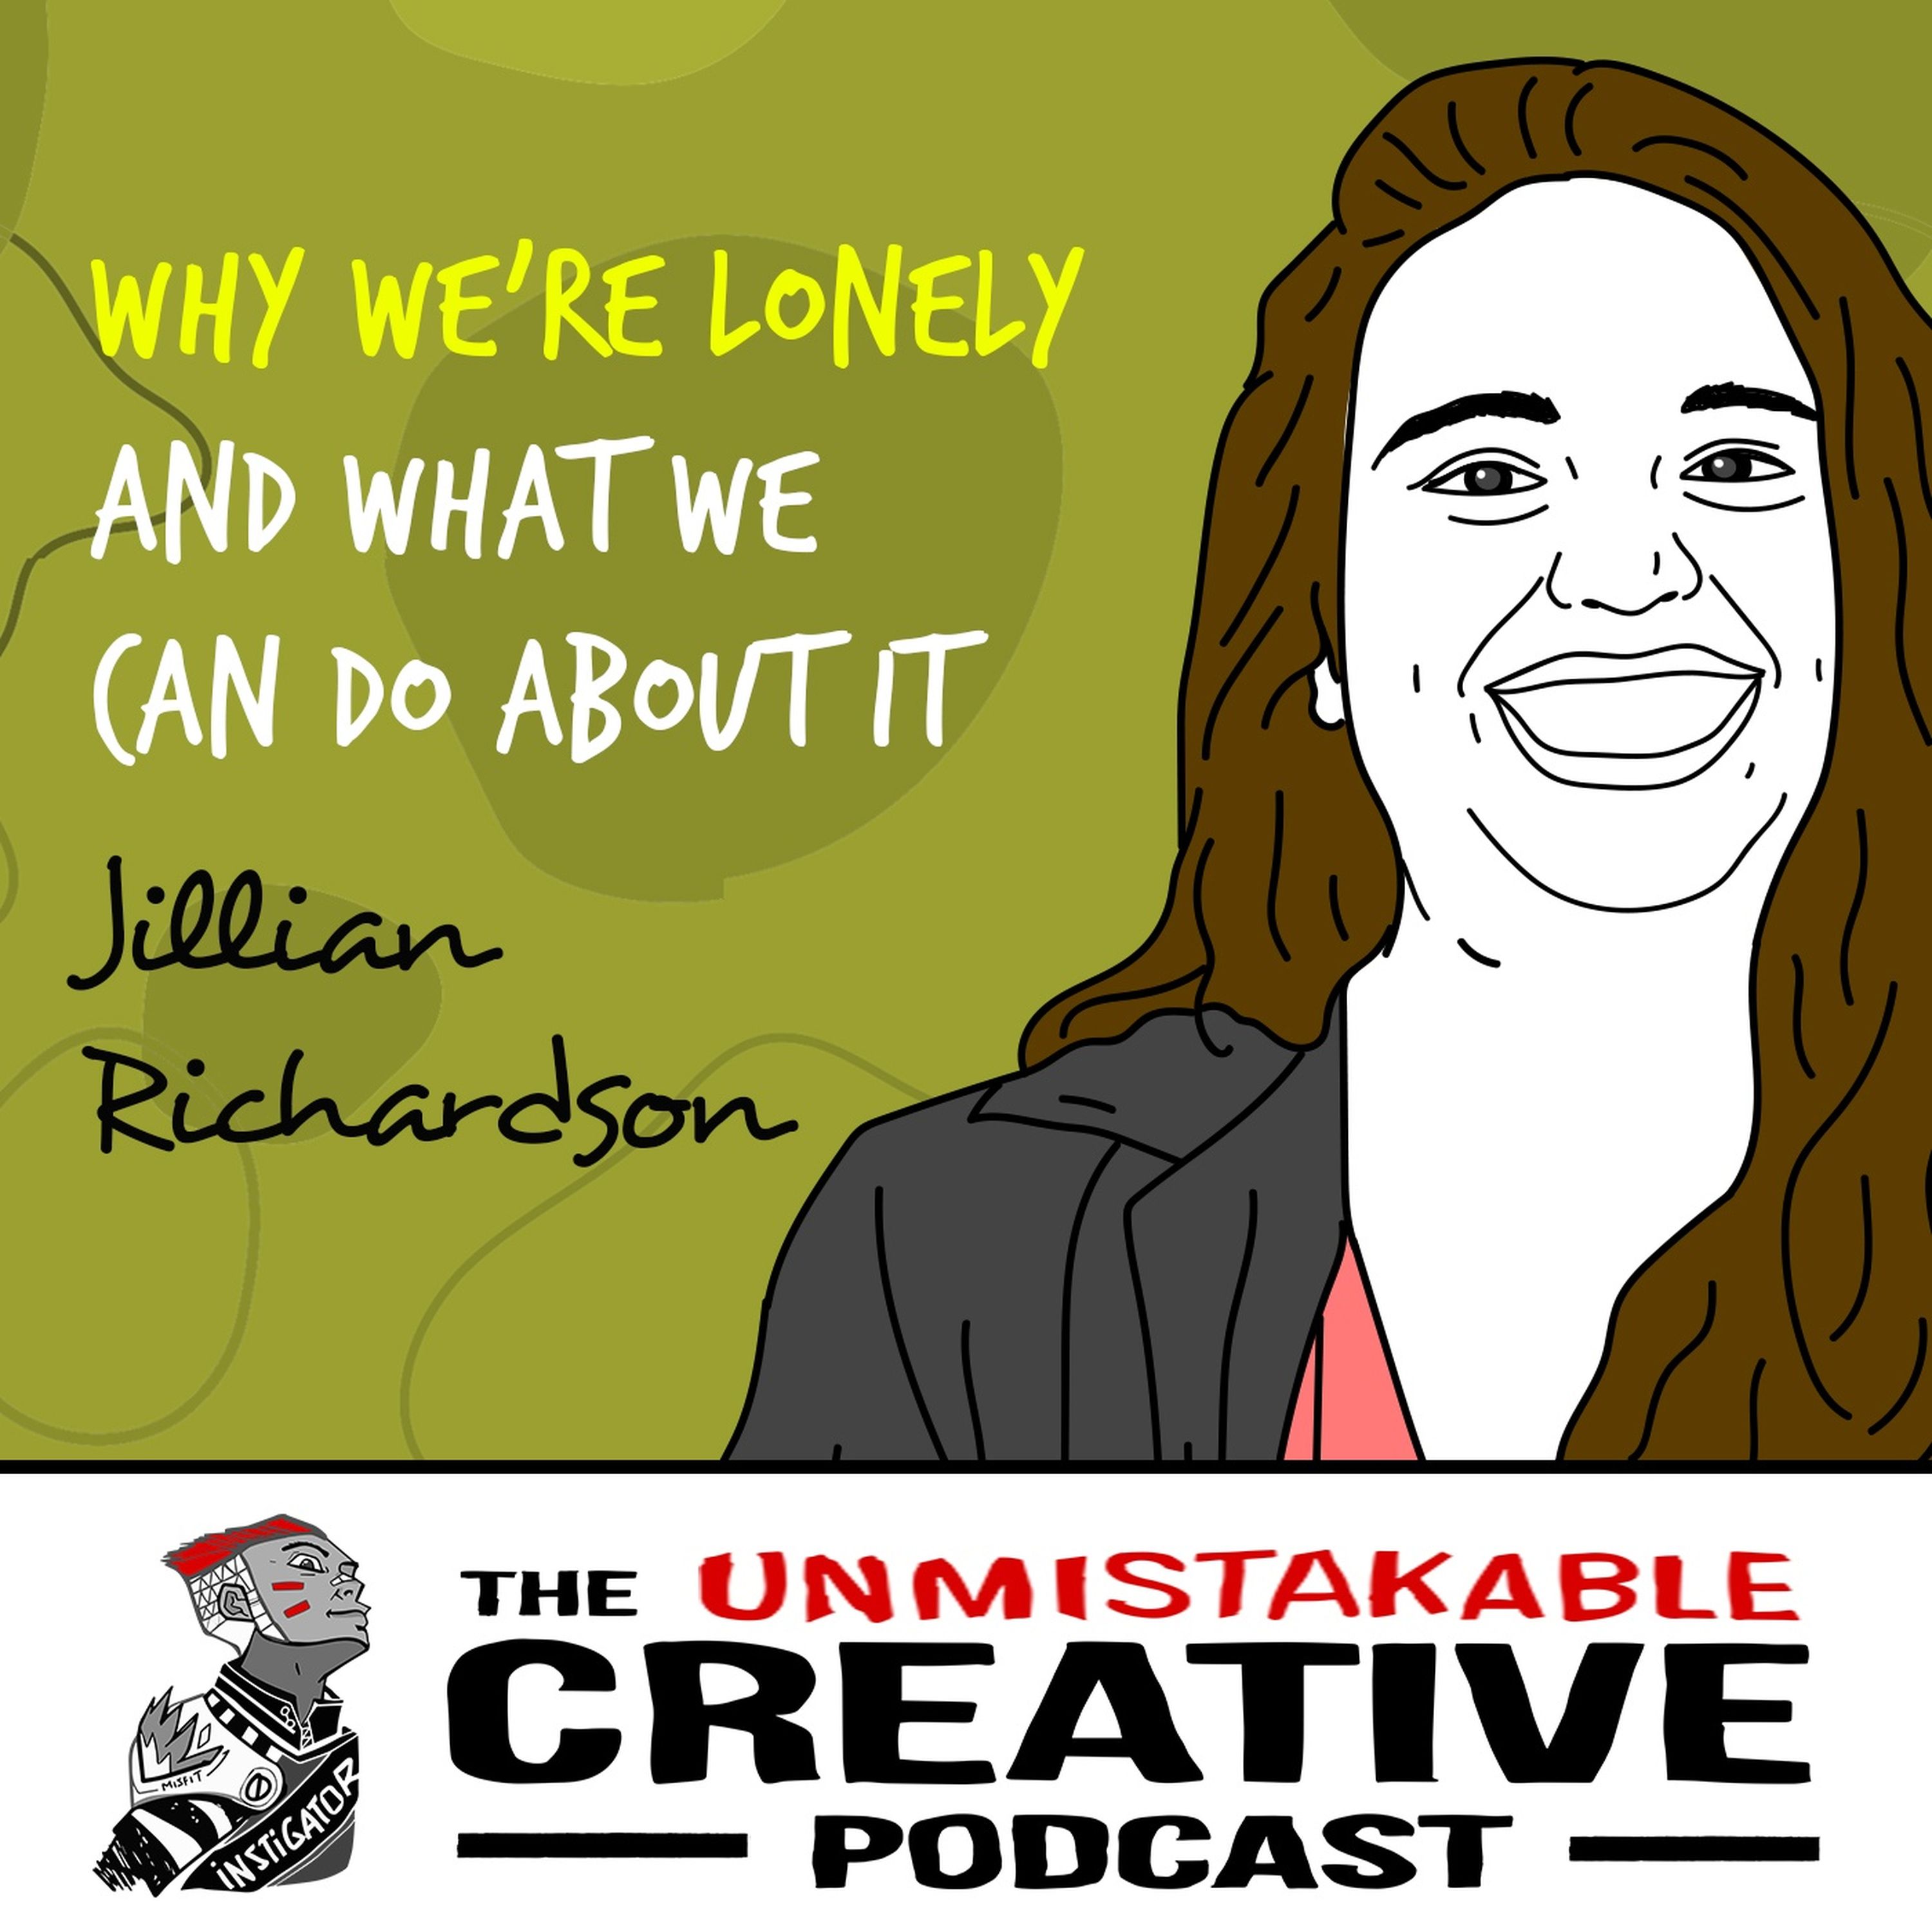 Jillian Richardson: Why We're Lonely and What We Can do About It Image